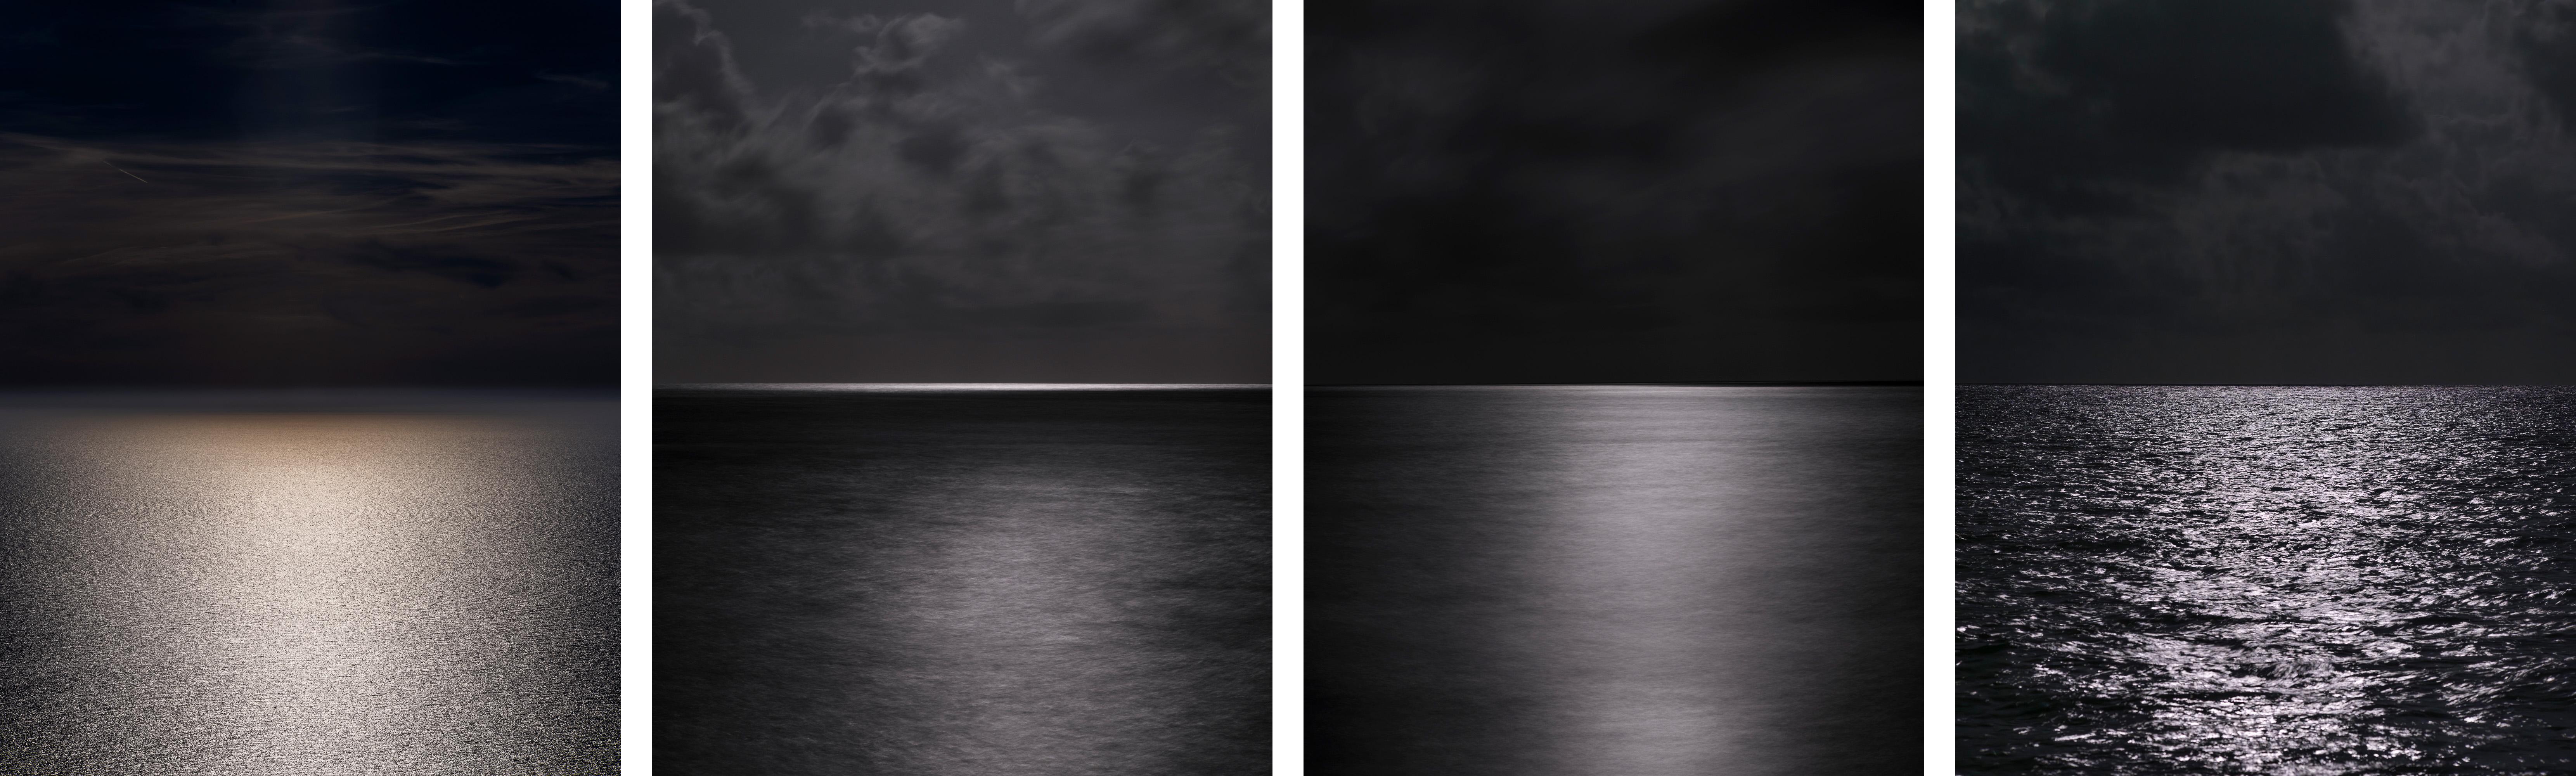 Miguel Winograd  Black and White Photograph - Set Sol de Mallorca, Moonrise II, I and IV. From the Series Mares. 